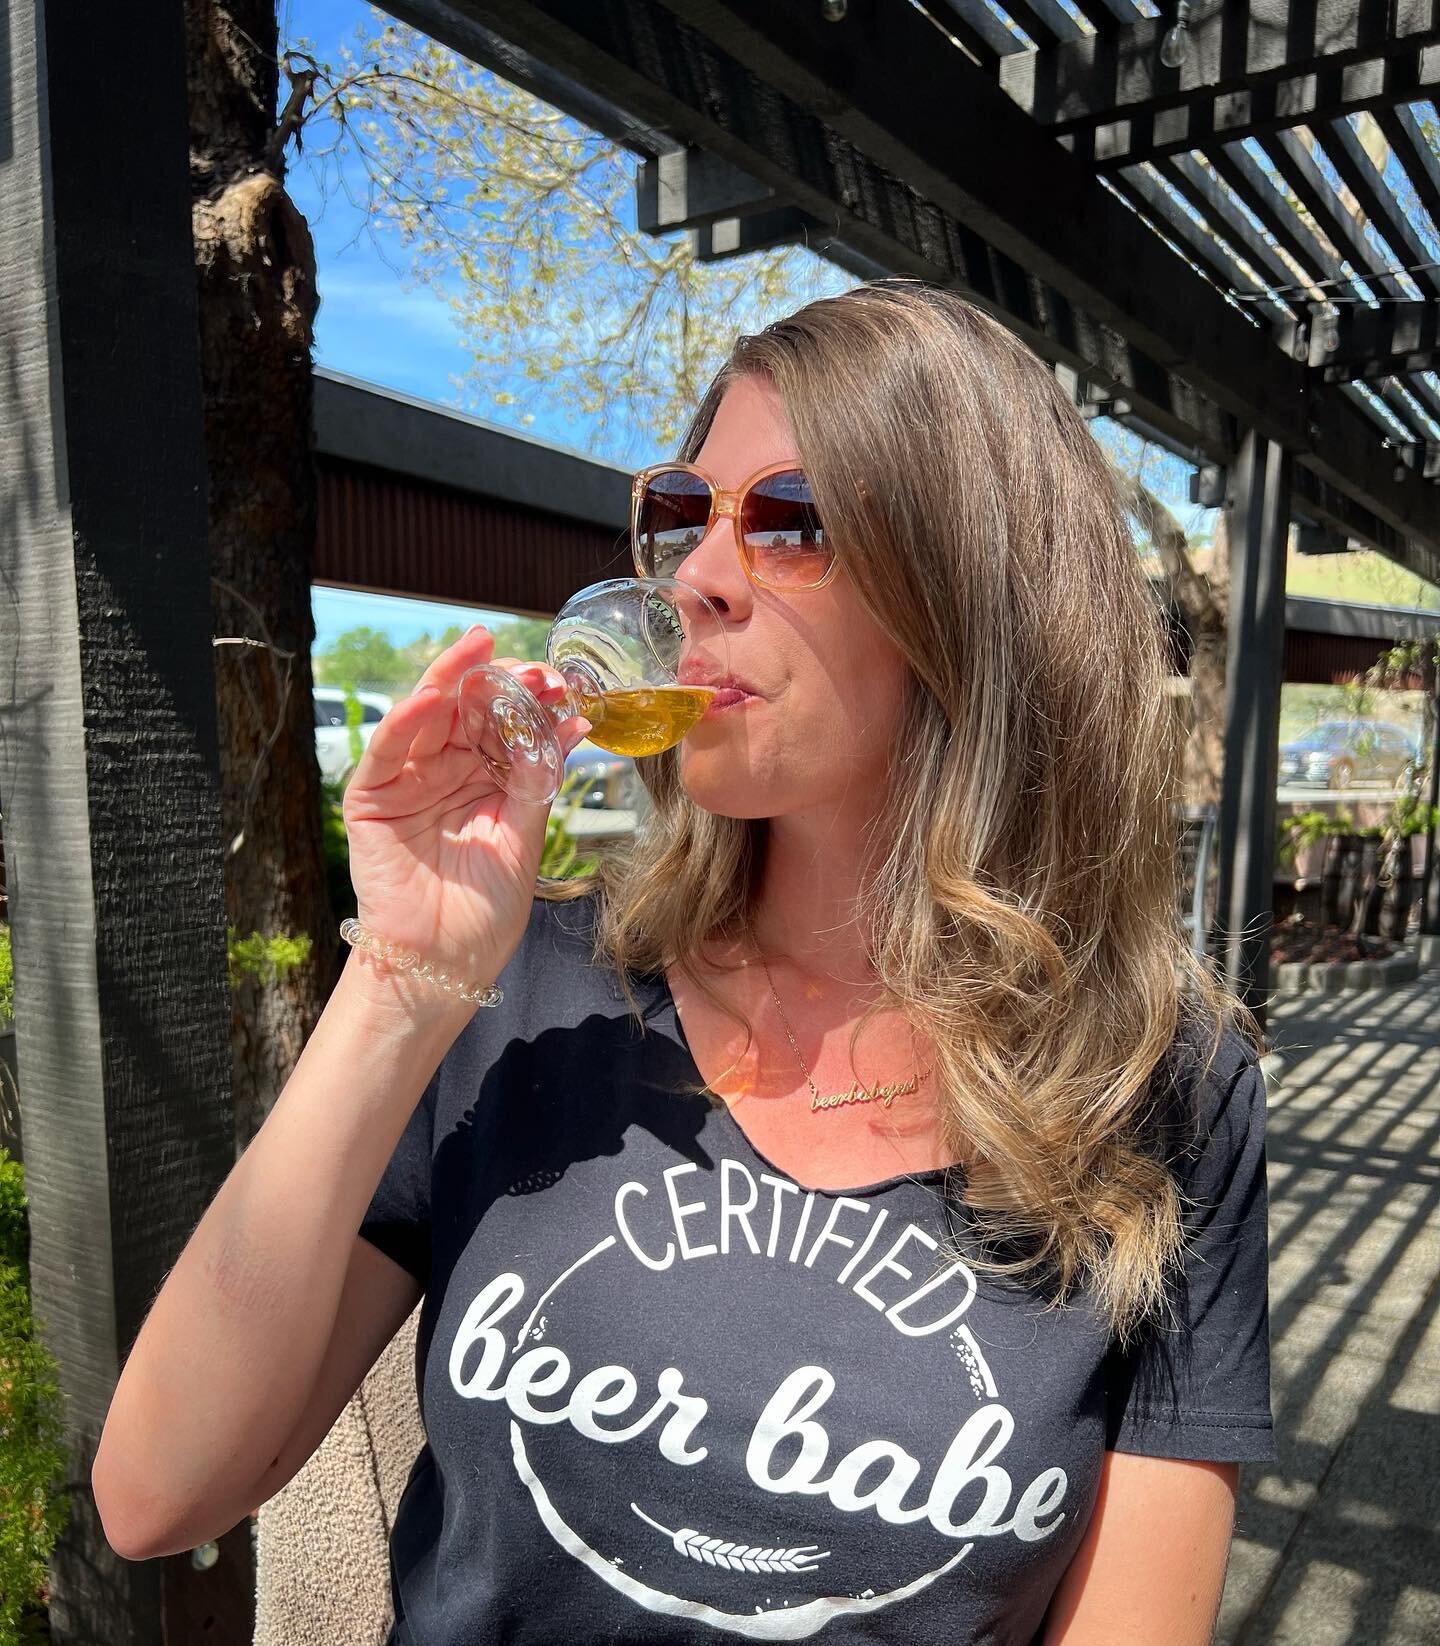 Finally made it to the mothership! 

I&rsquo;ve always been a fan @firestonewalker&rsquo;s barrel aged beer &mdash; especially their barleywines, strong ales + stouts. This time, I decided to change it up a bit and try some of their wild ales, too. 
